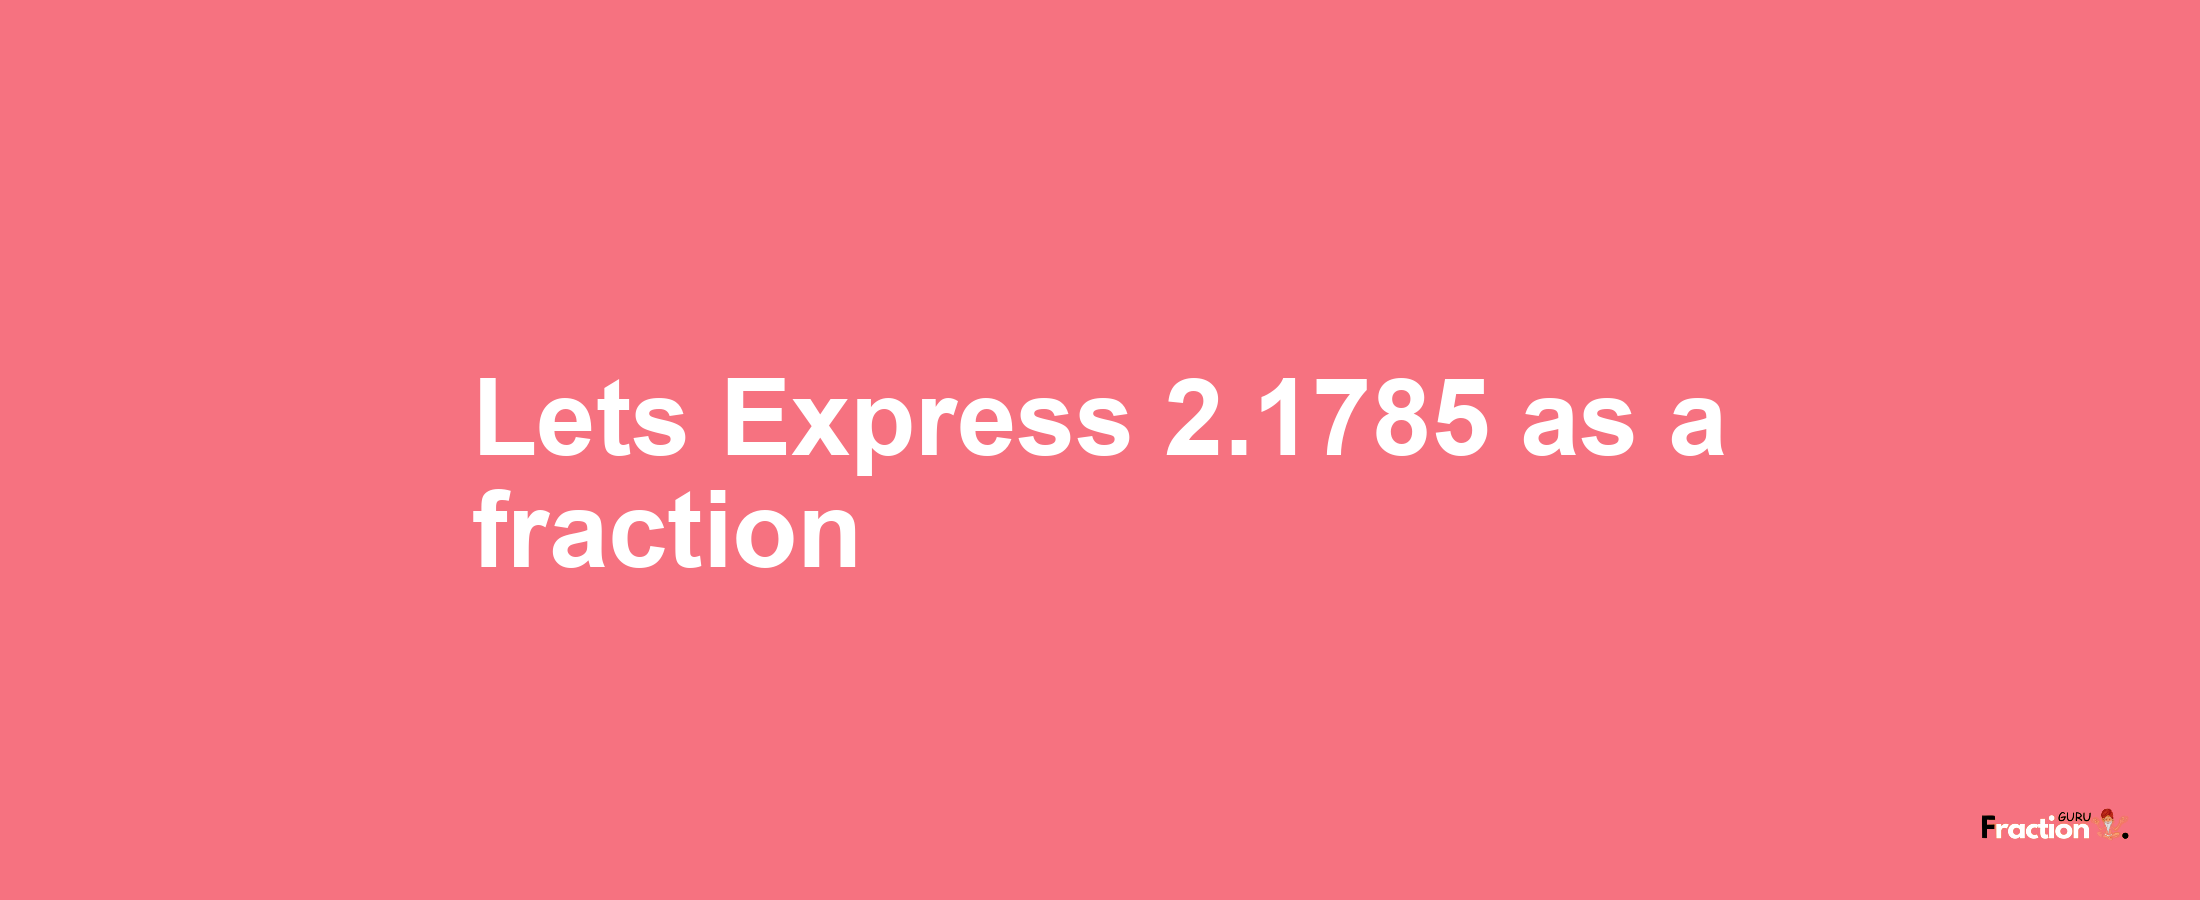 Lets Express 2.1785 as afraction